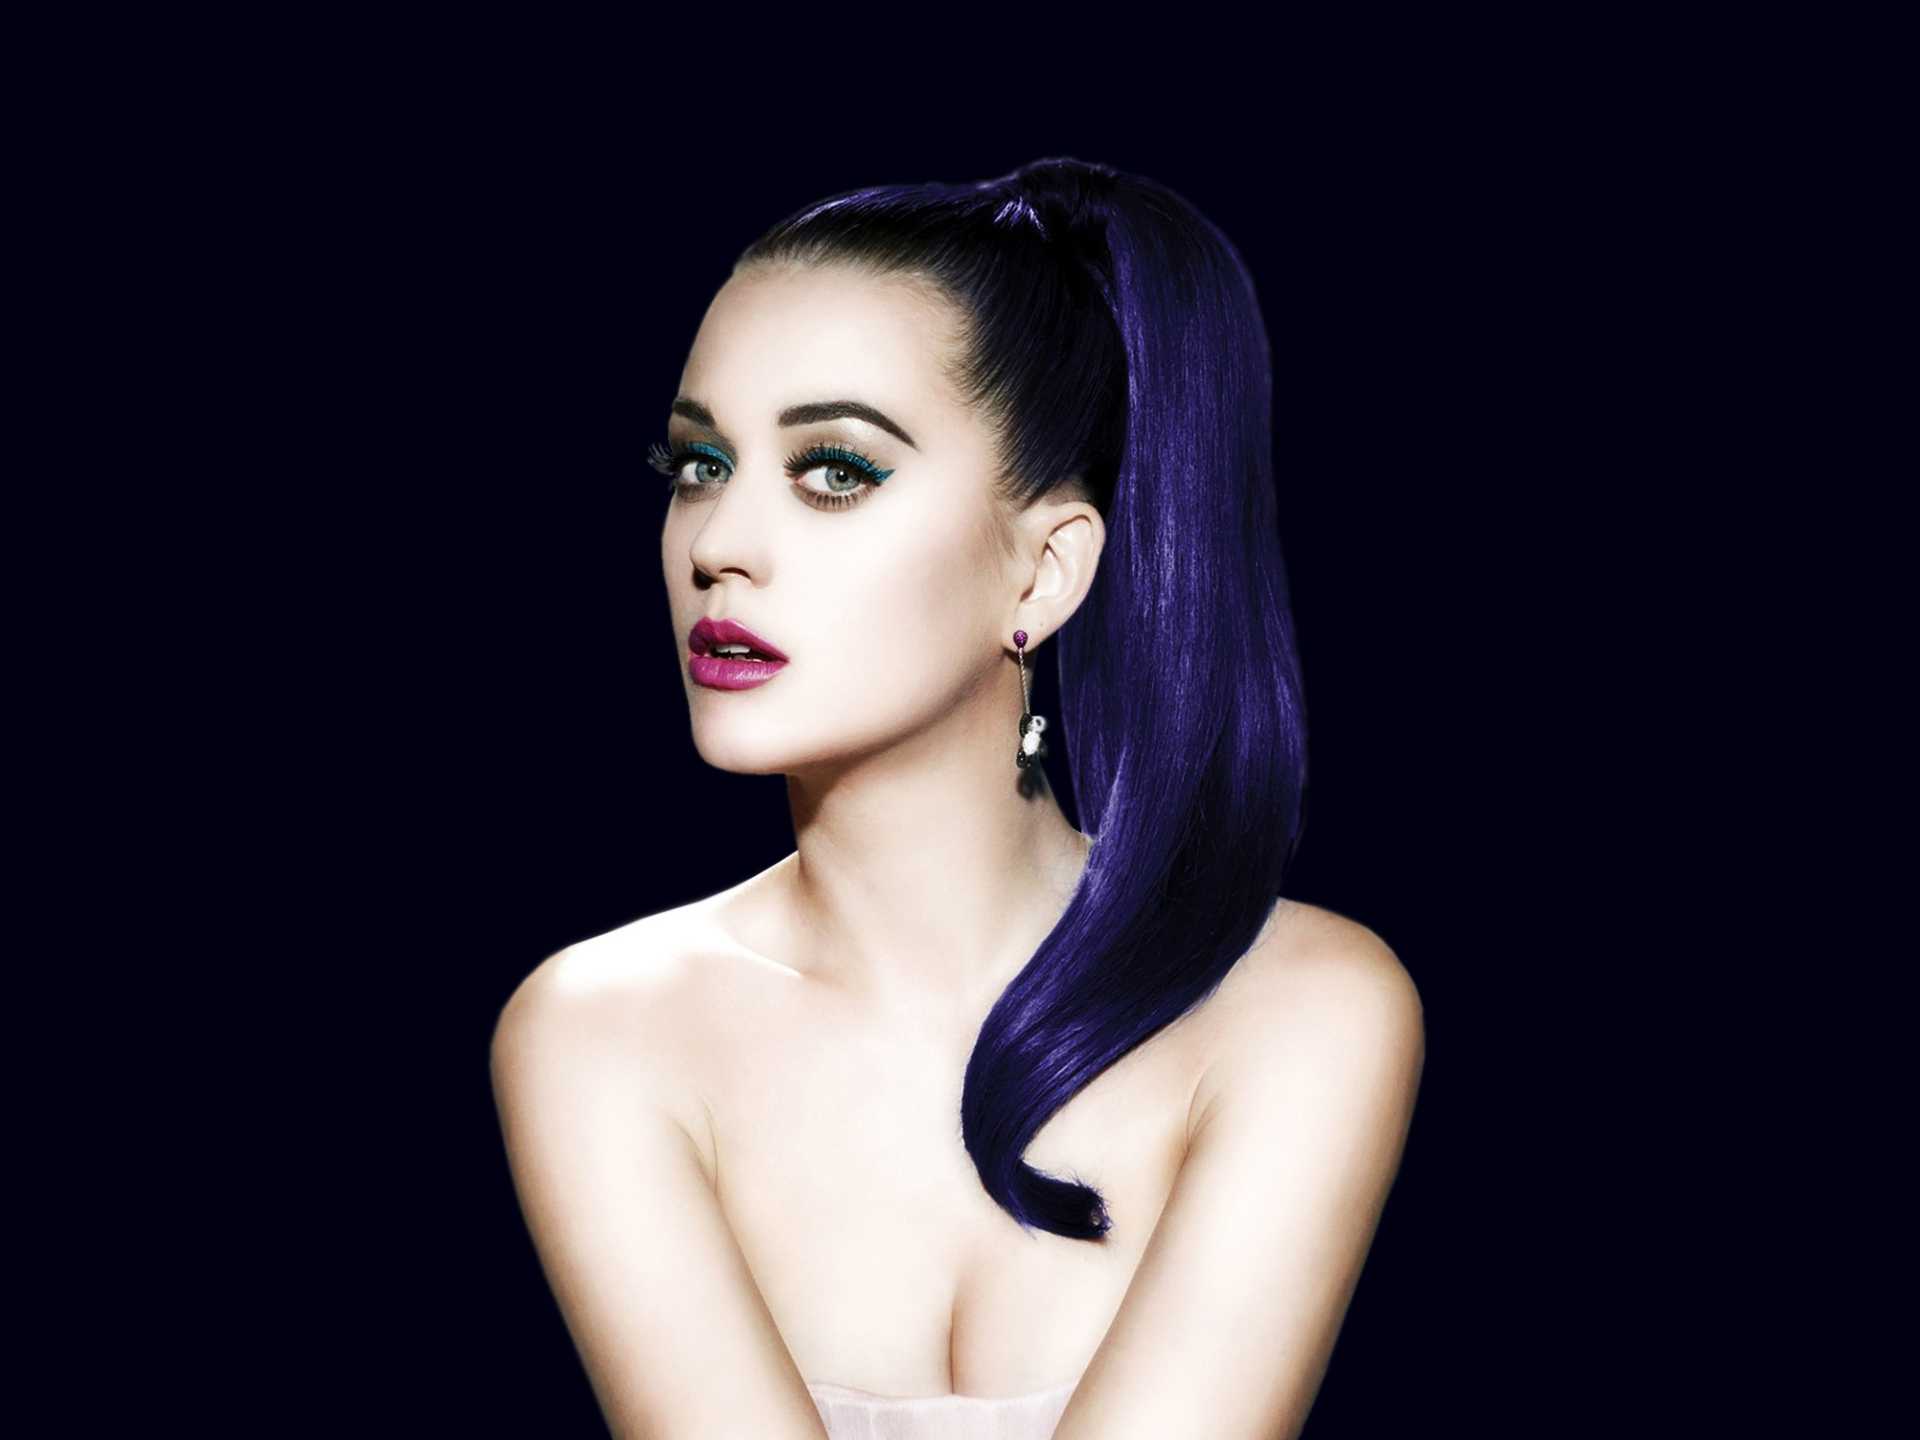 Katy Perrys download Wallpapers